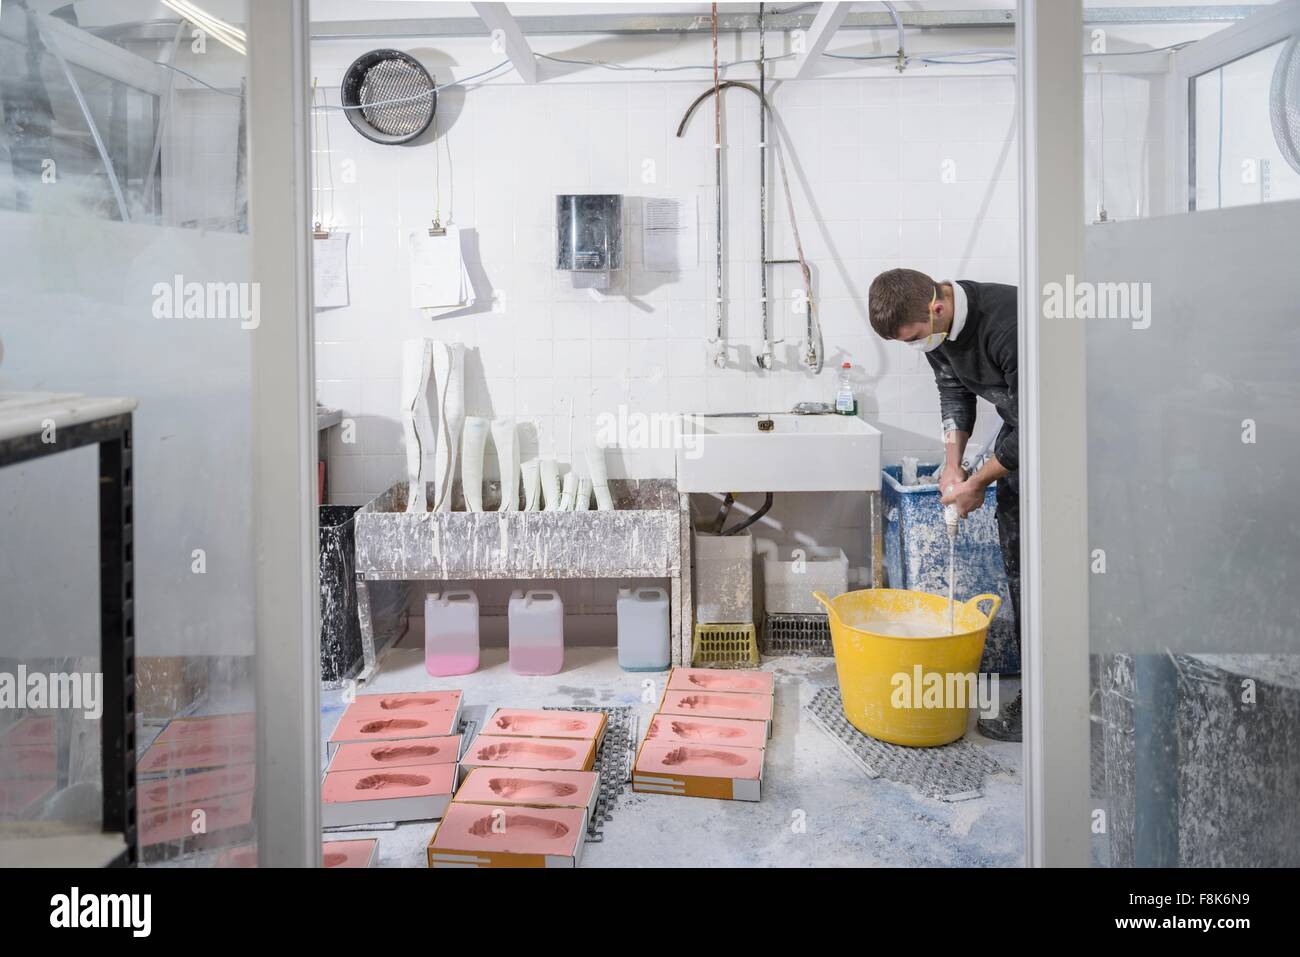 Worker casting plaster into foot moulds for orthopaedic support in factory Stock Photo